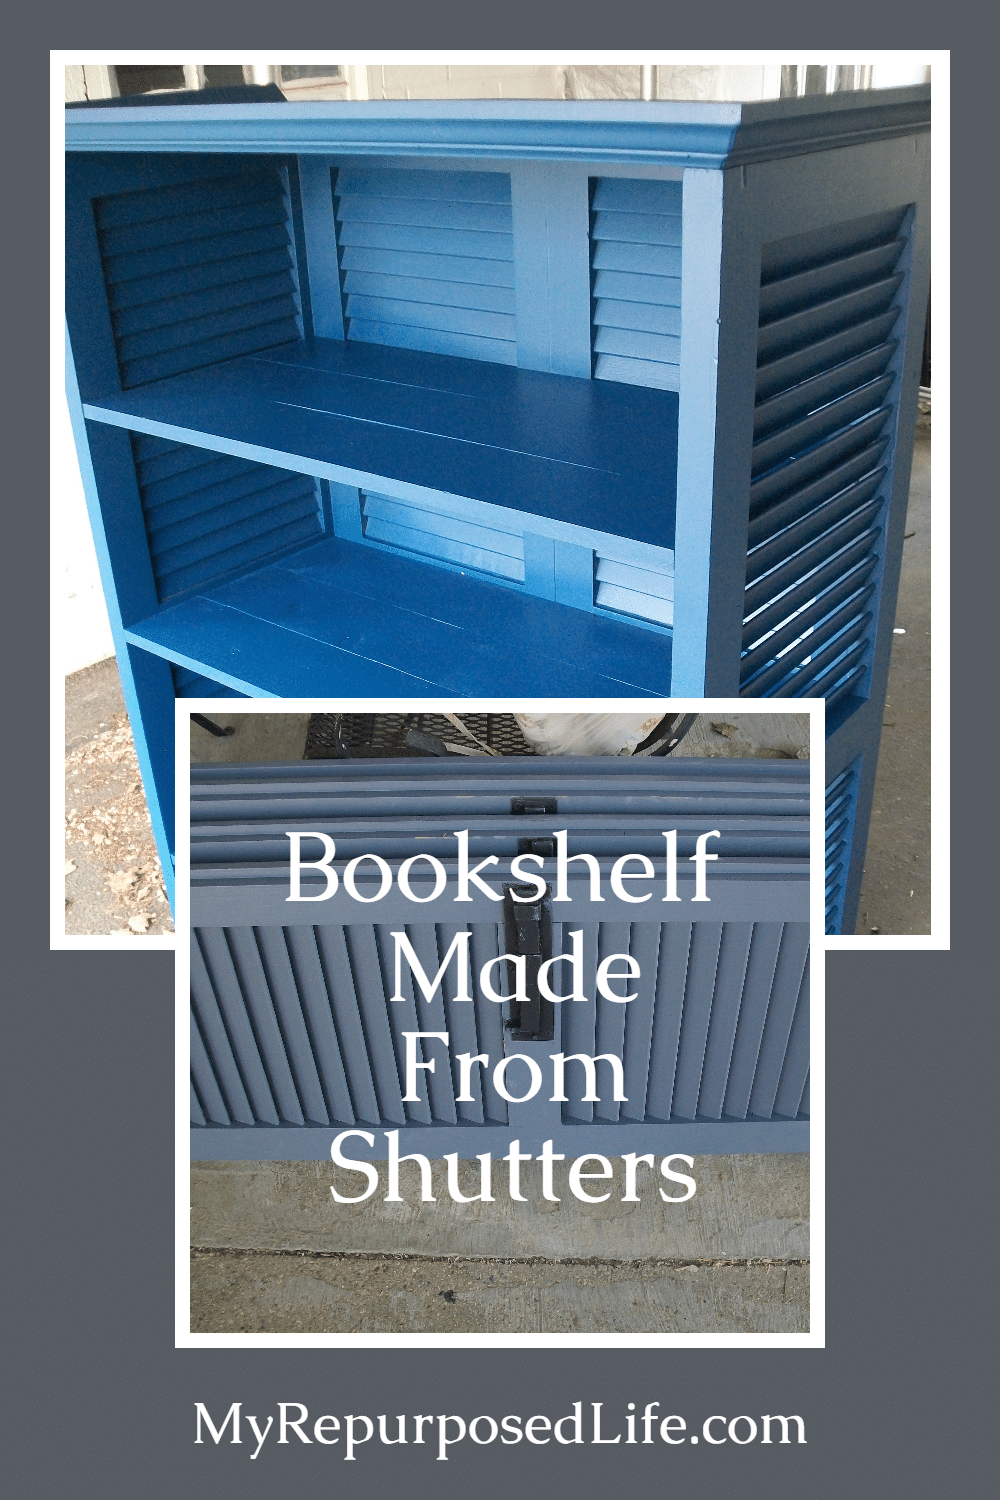 How to use four shutters to make a repurposed bookshelf. Step by step directions included to make your own project. Lots of tips and tidbits to Do It Yourself! #MyRepurposedLife #repurposed #shutter #bookshelf #upcycle #diy #project via @repurposedlife